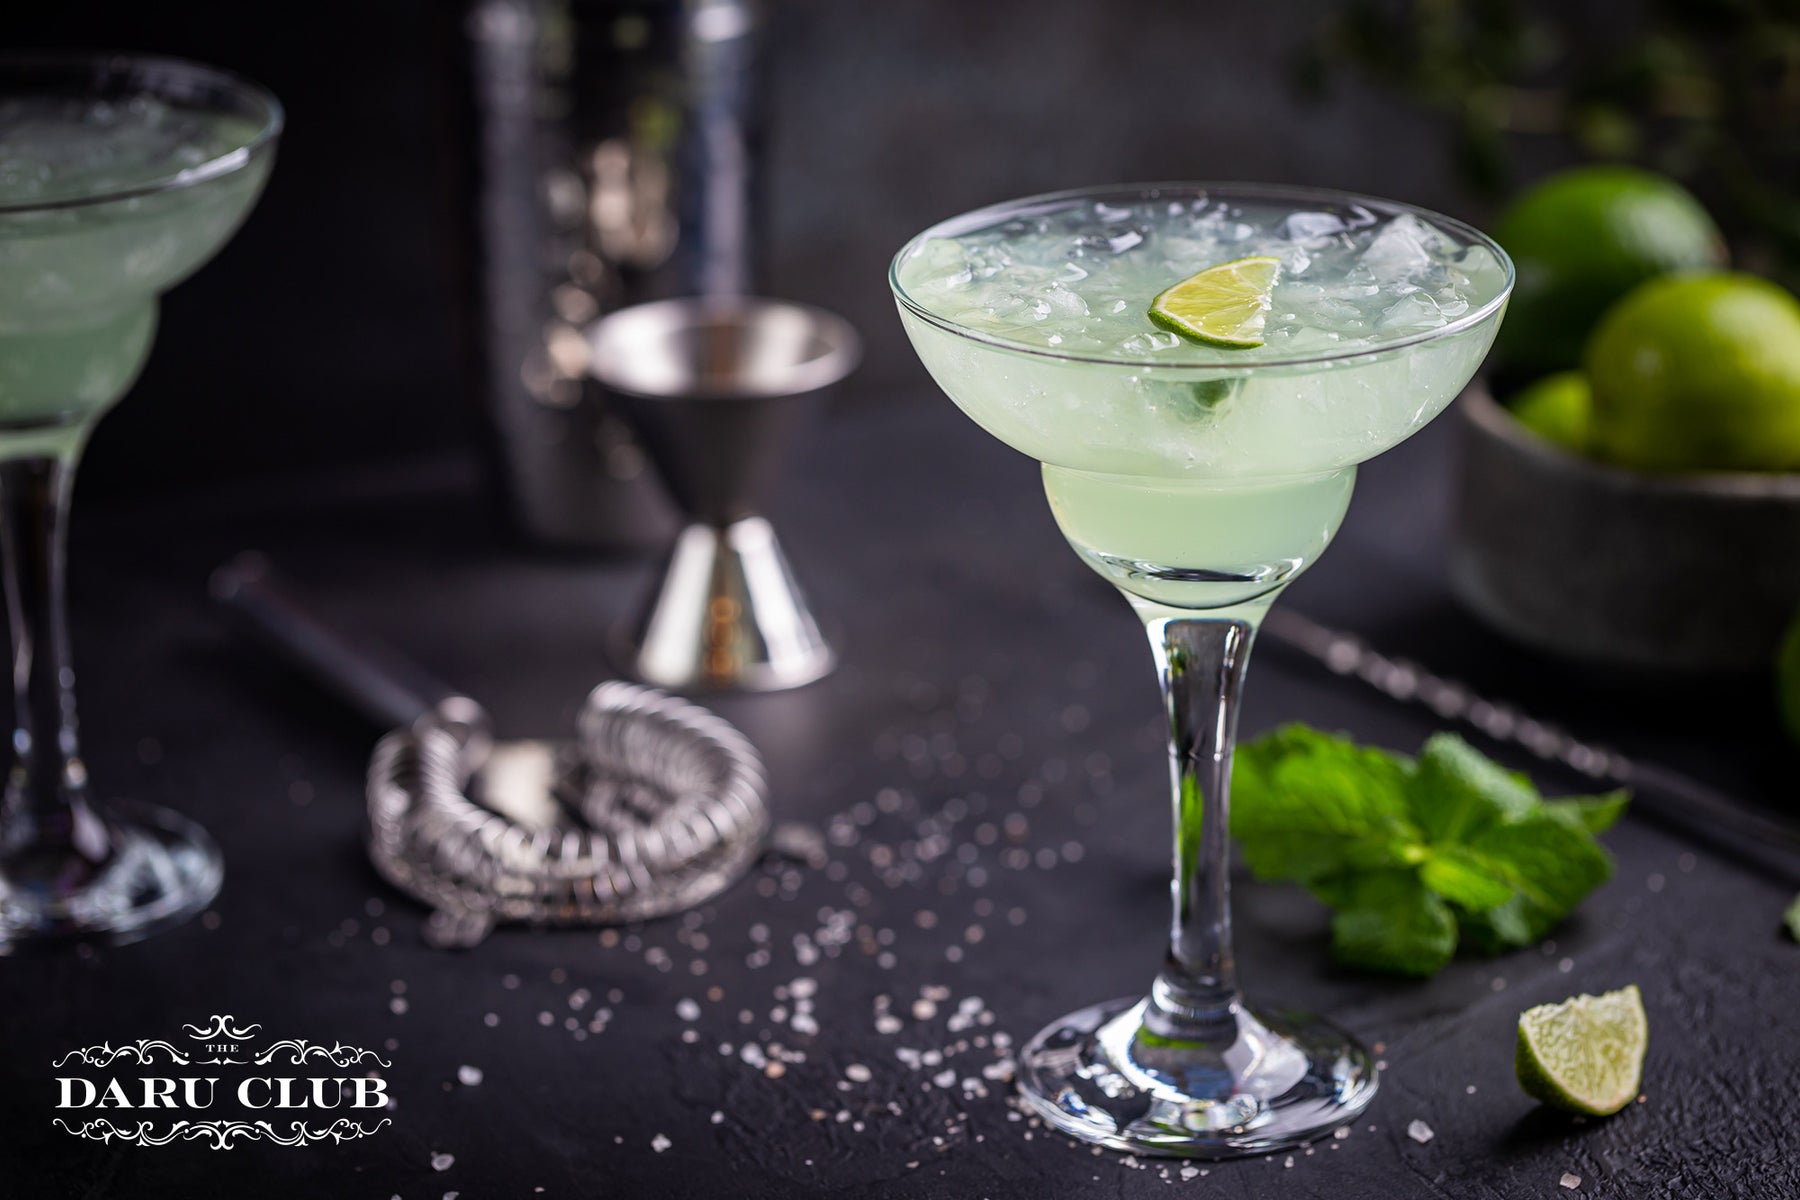 Try our Margarita Cocktail Recipe -  The classic Mexican favourite